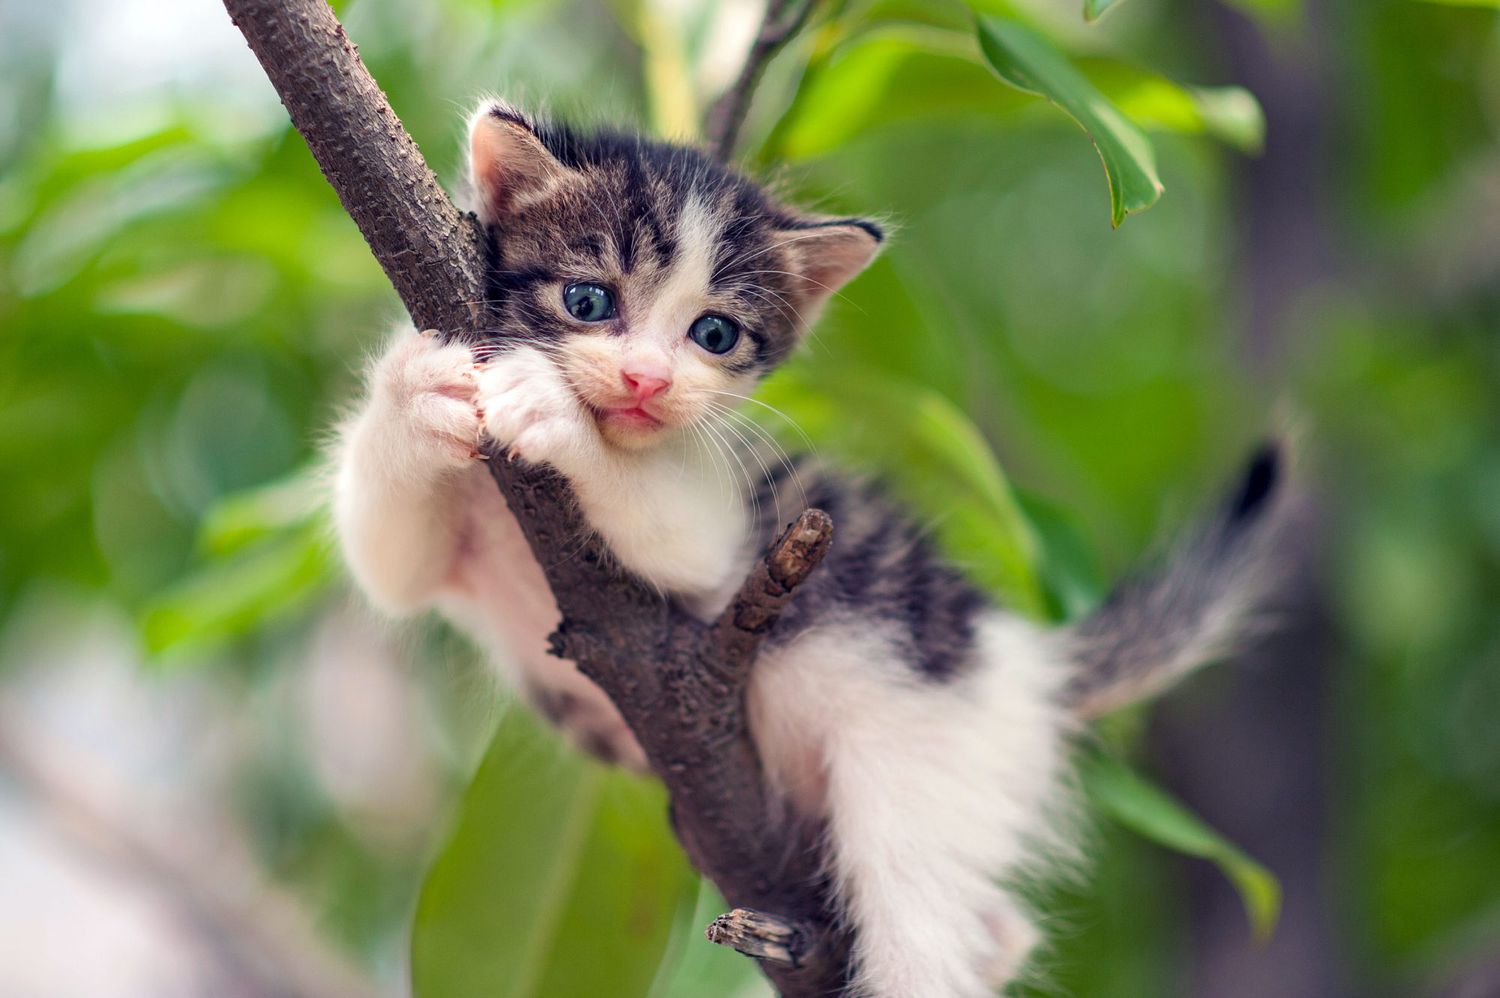 tiny kitten clinging to branch of tree